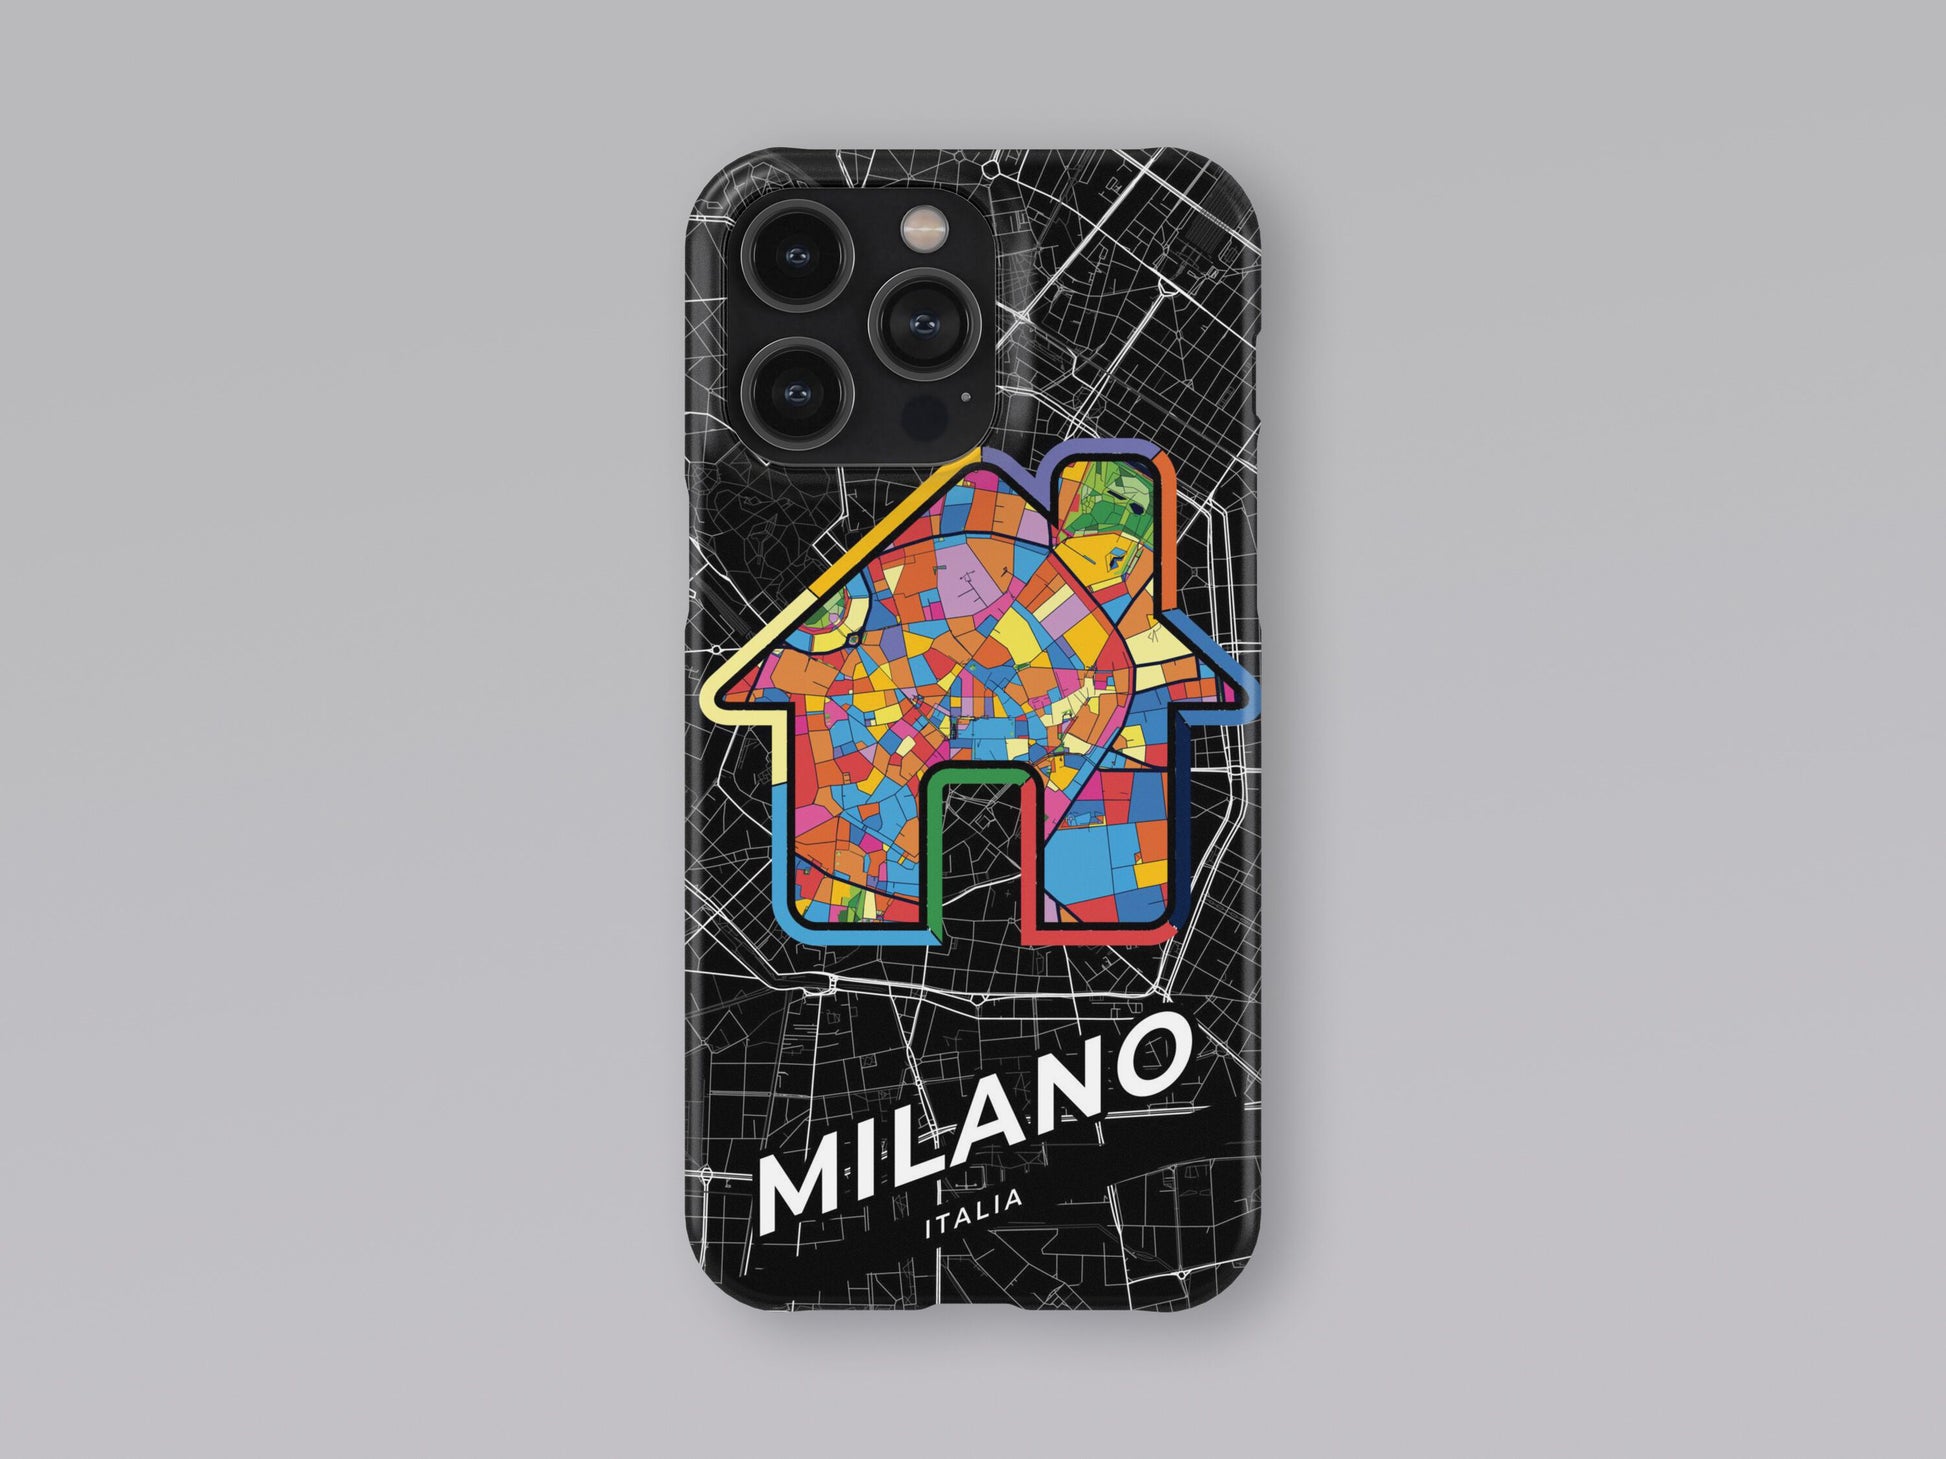 Milan Italy slim phone case with colorful icon 3